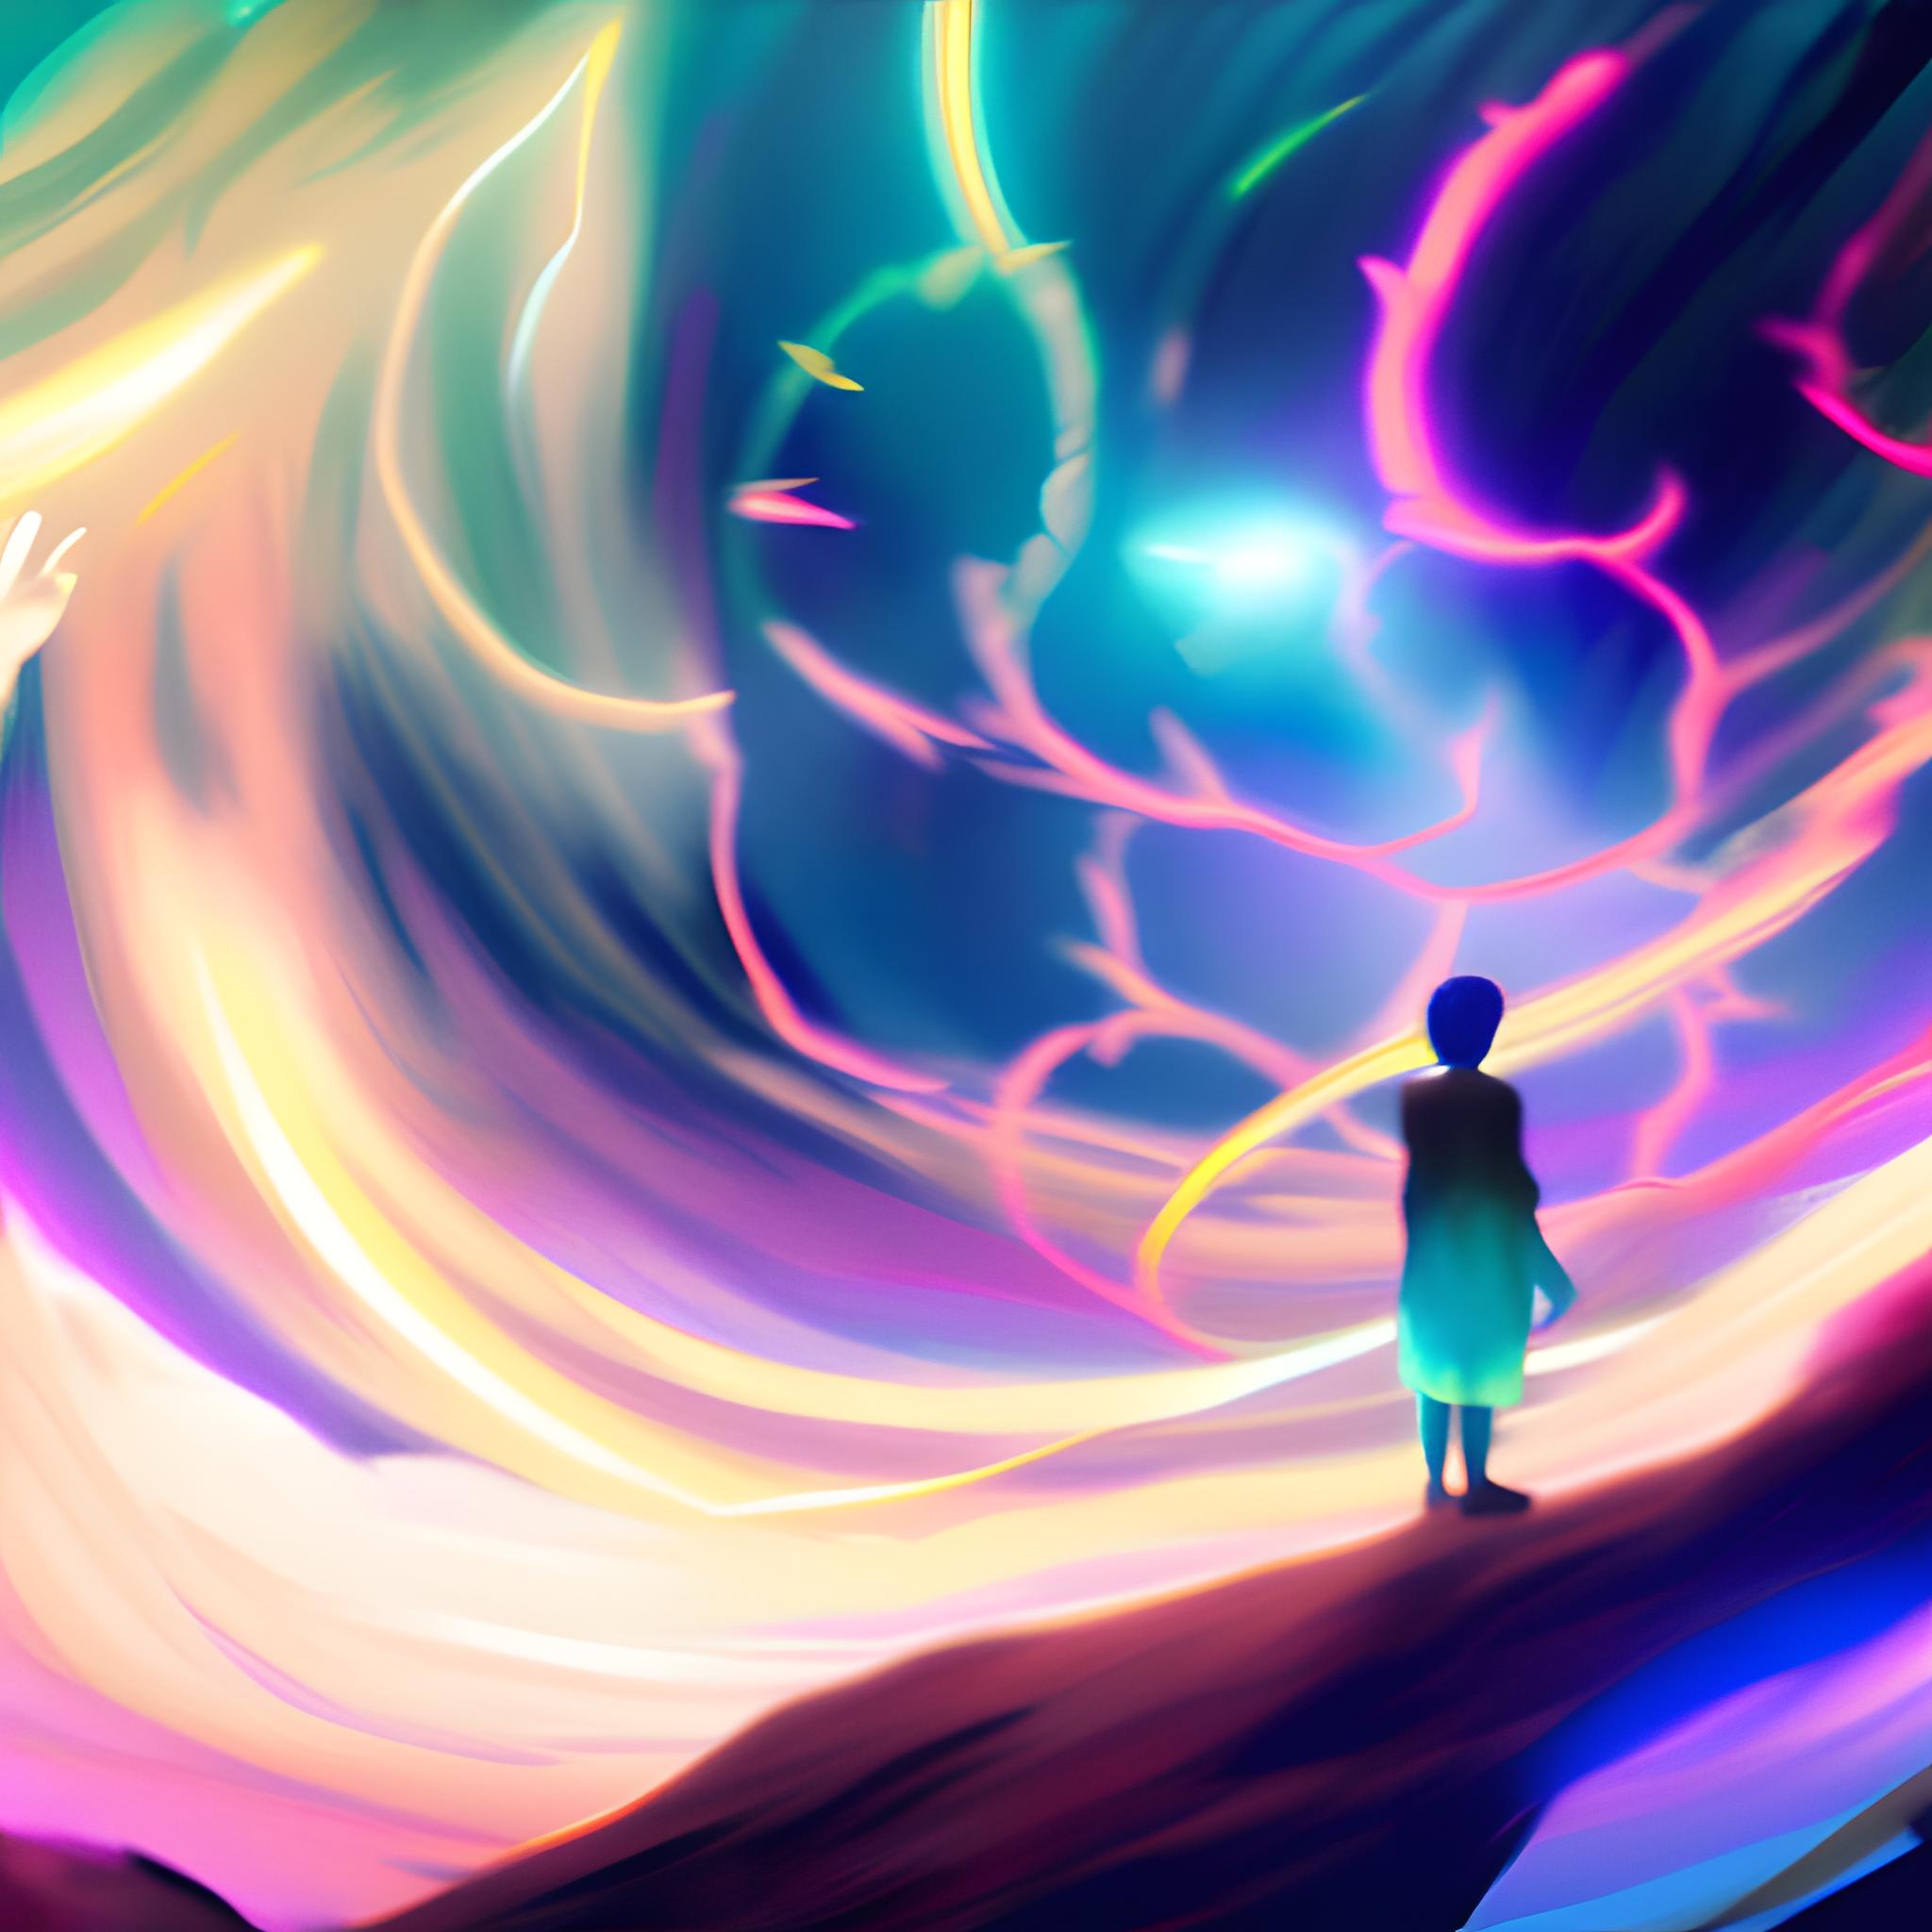 _Against a backdrop of swirling mists and vibrant hues, a young protagonist stands at the cent...jpg